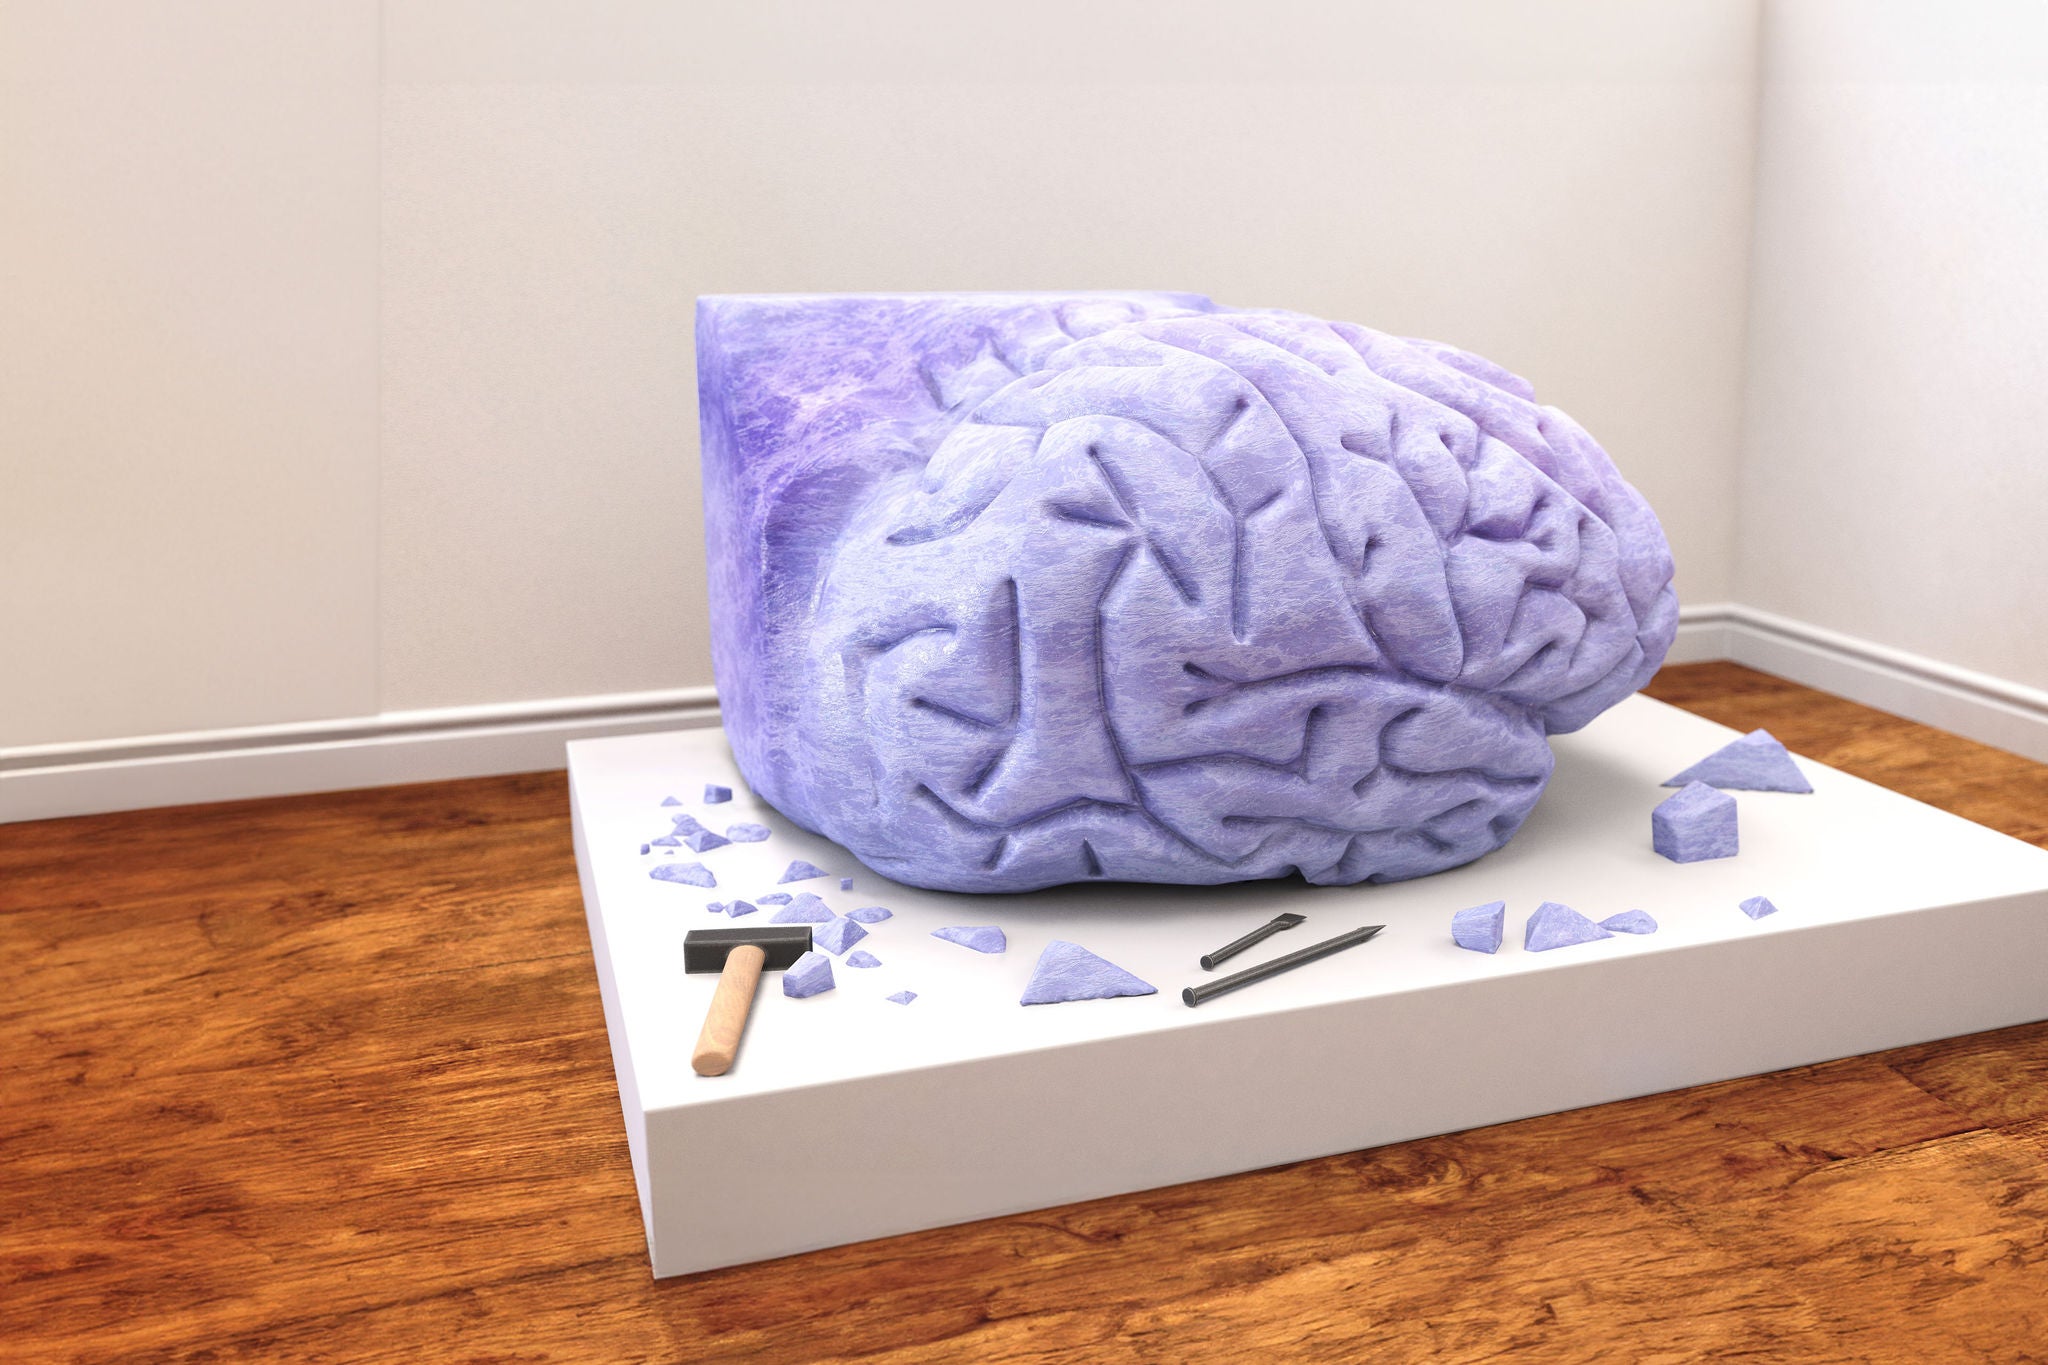 Big human brain sculpted from purple marble stone.